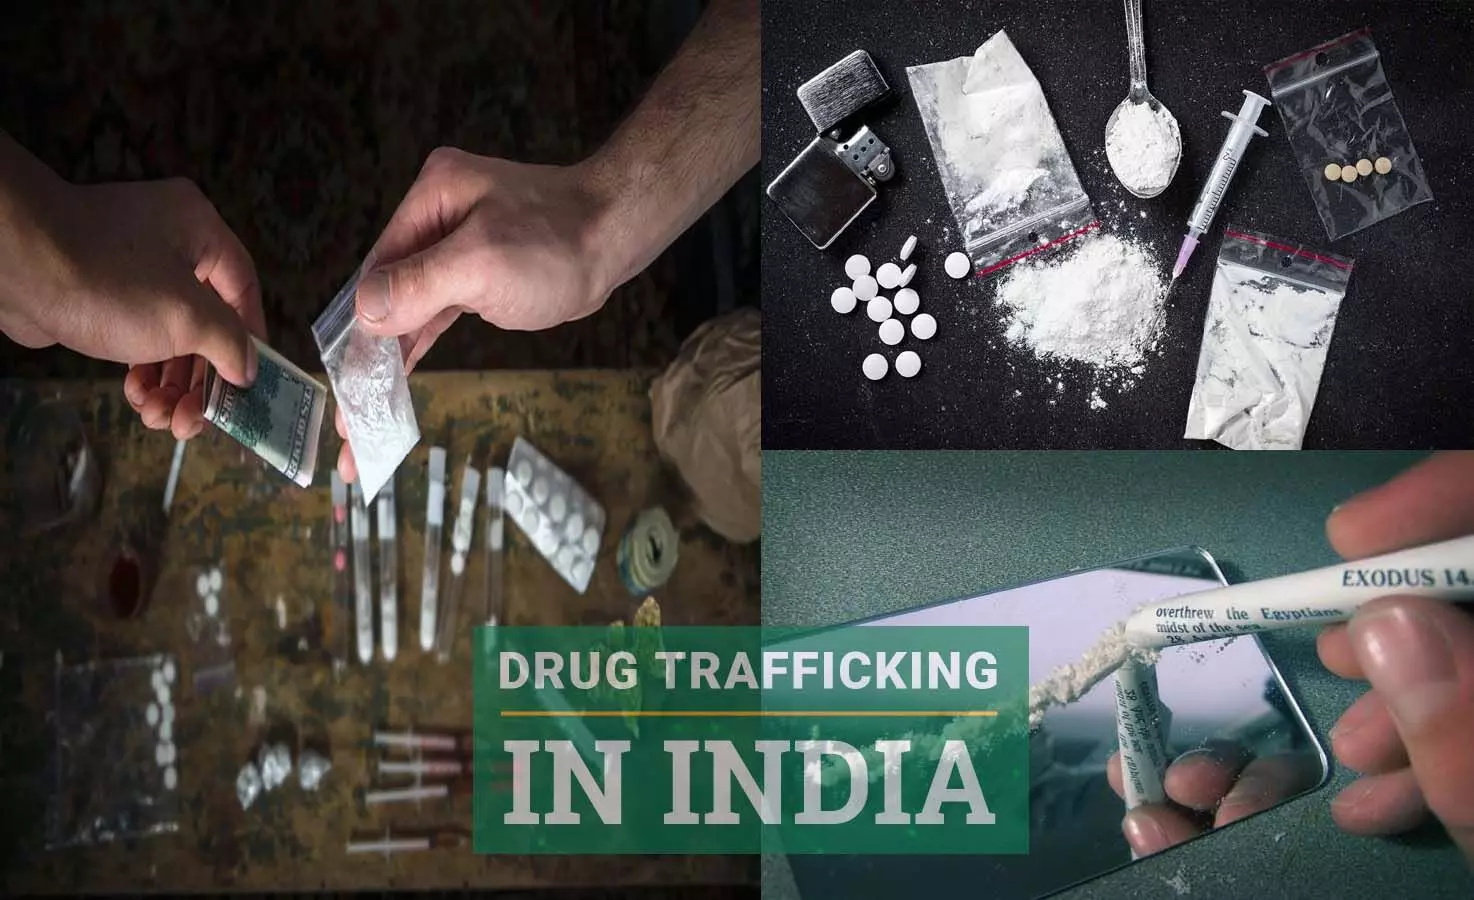 90% of drug consignments in the country are never caught